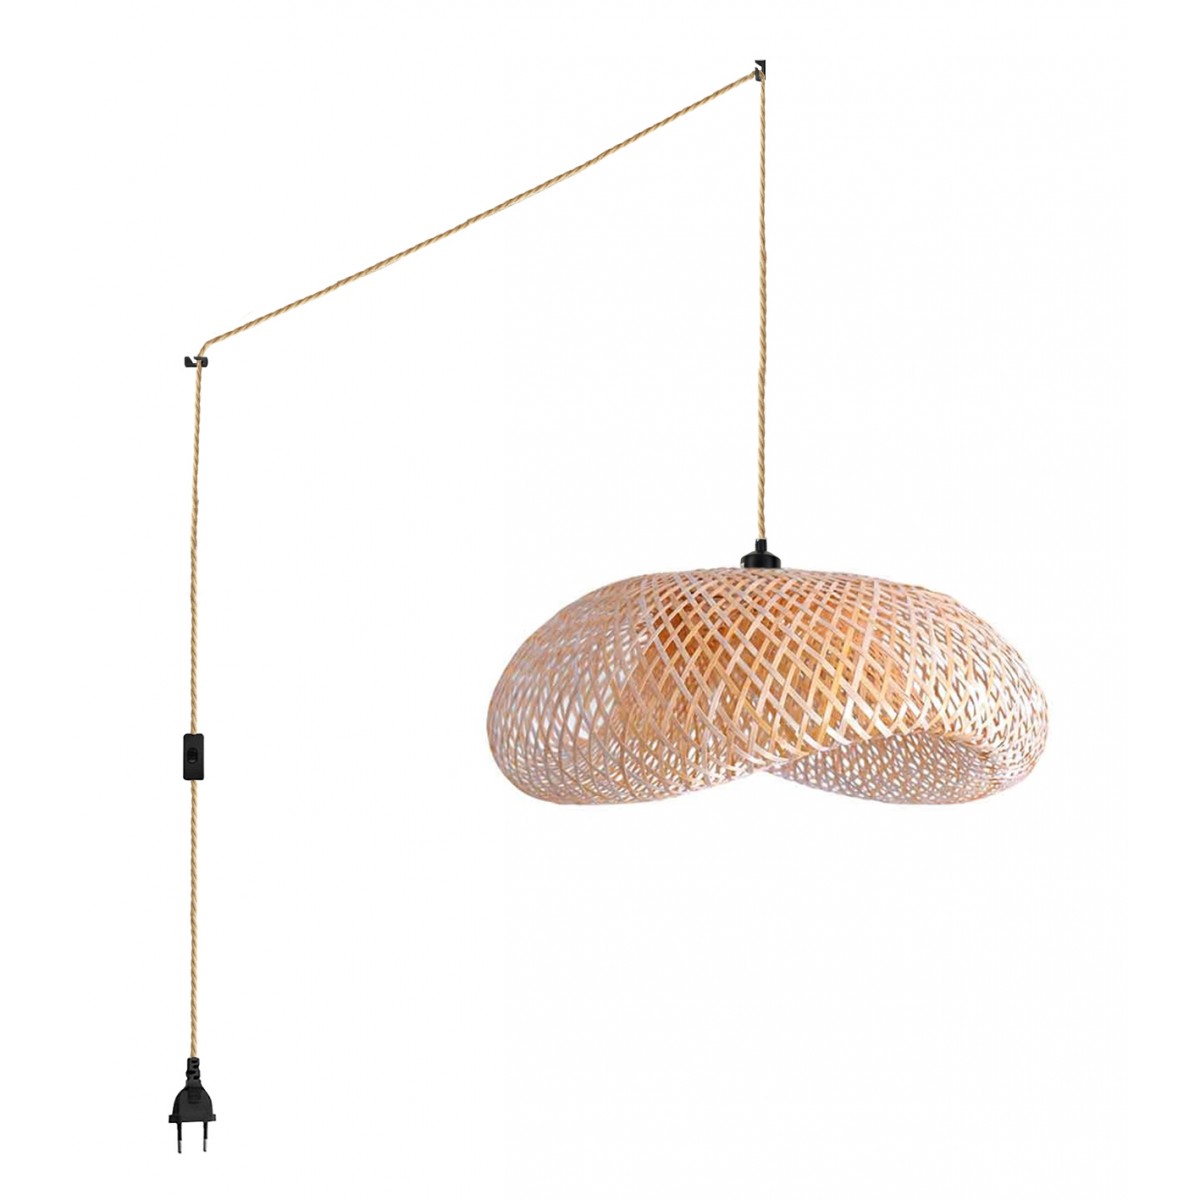 Wicker pendant lamp "Vimet Lite" with switch and socket